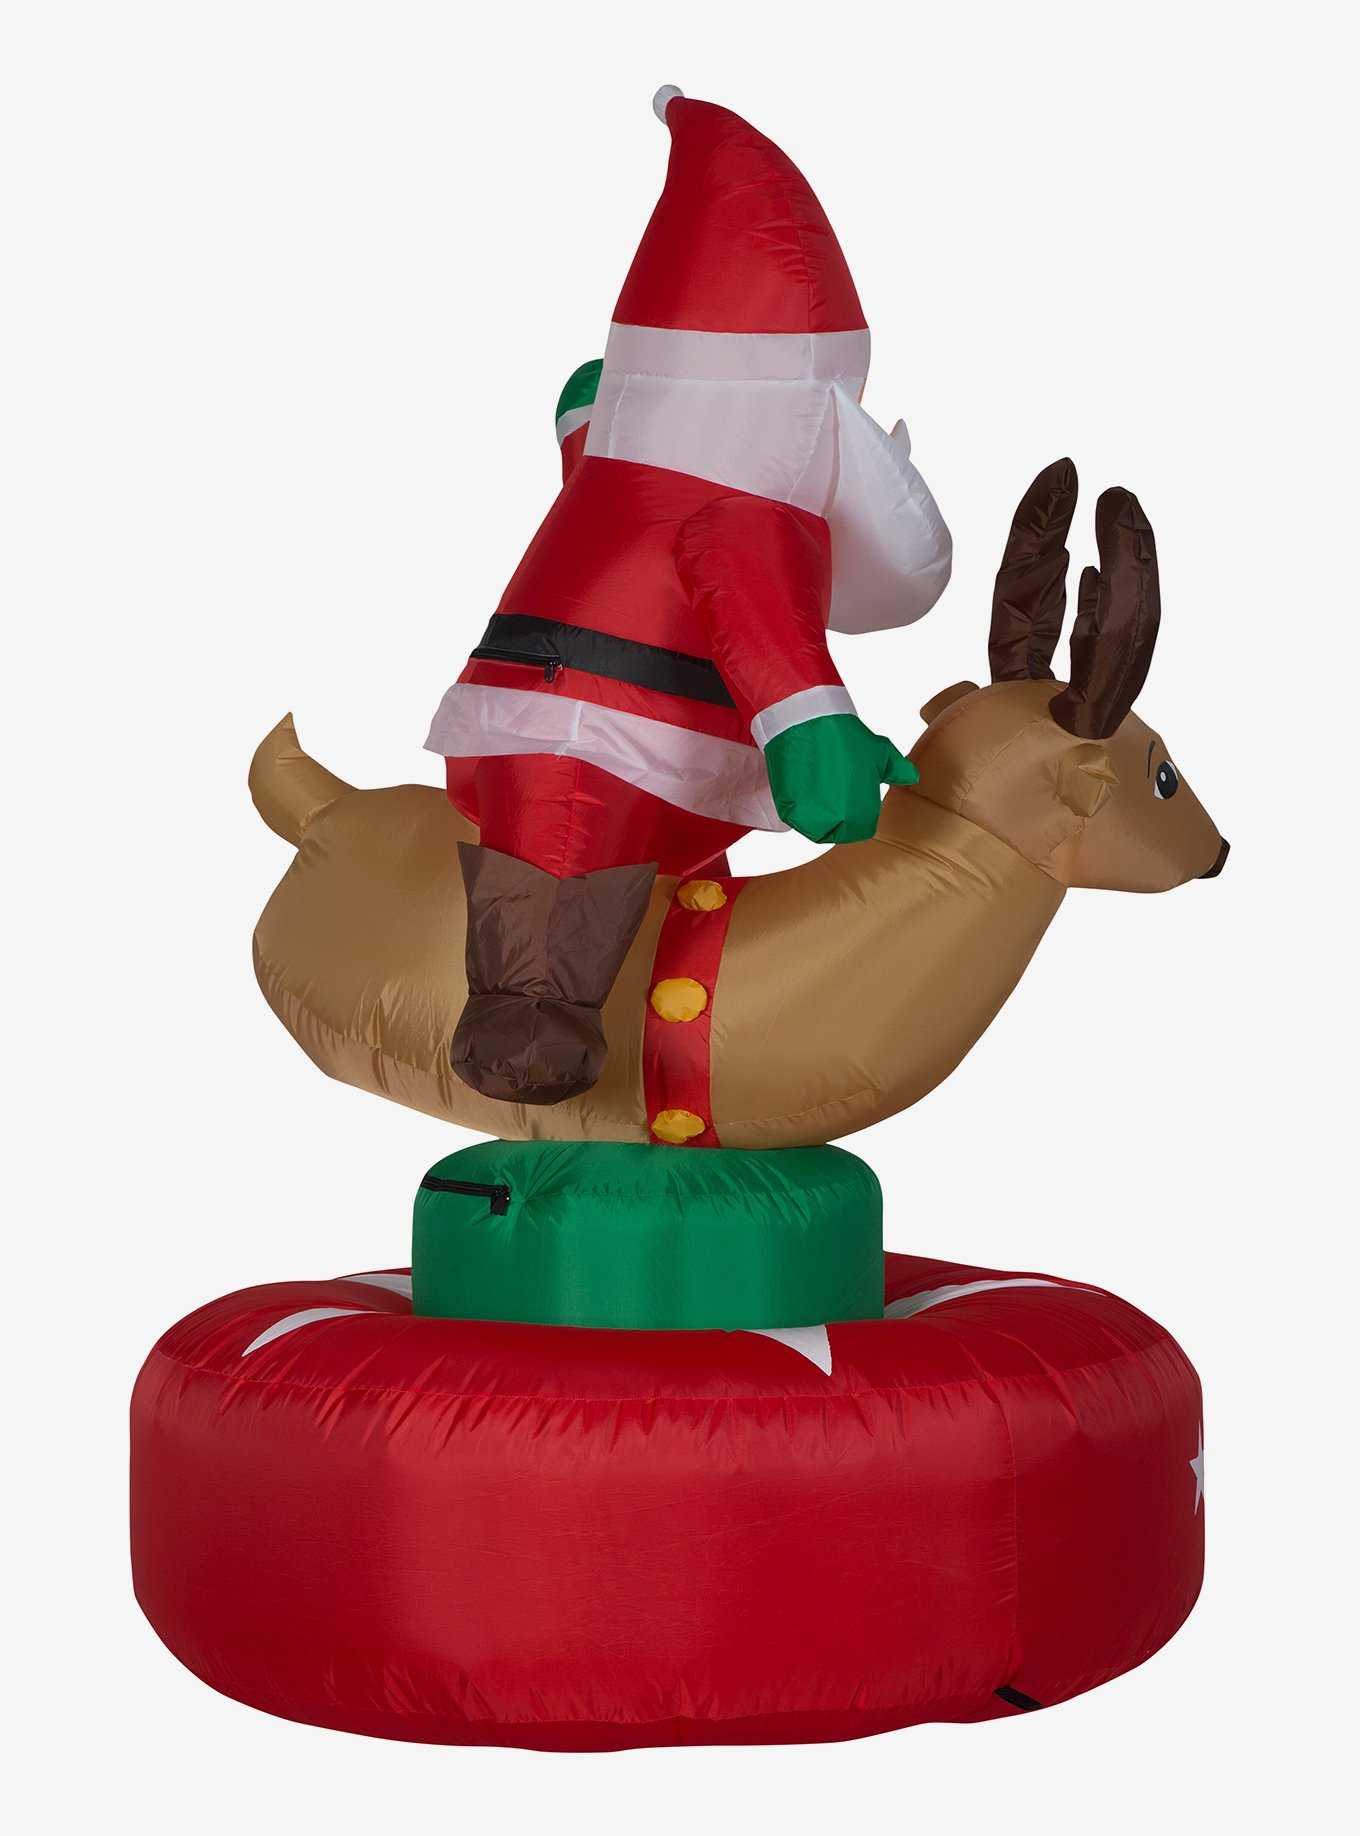 Reindeer Rodeo with Santa Animated Airblown, , hi-res